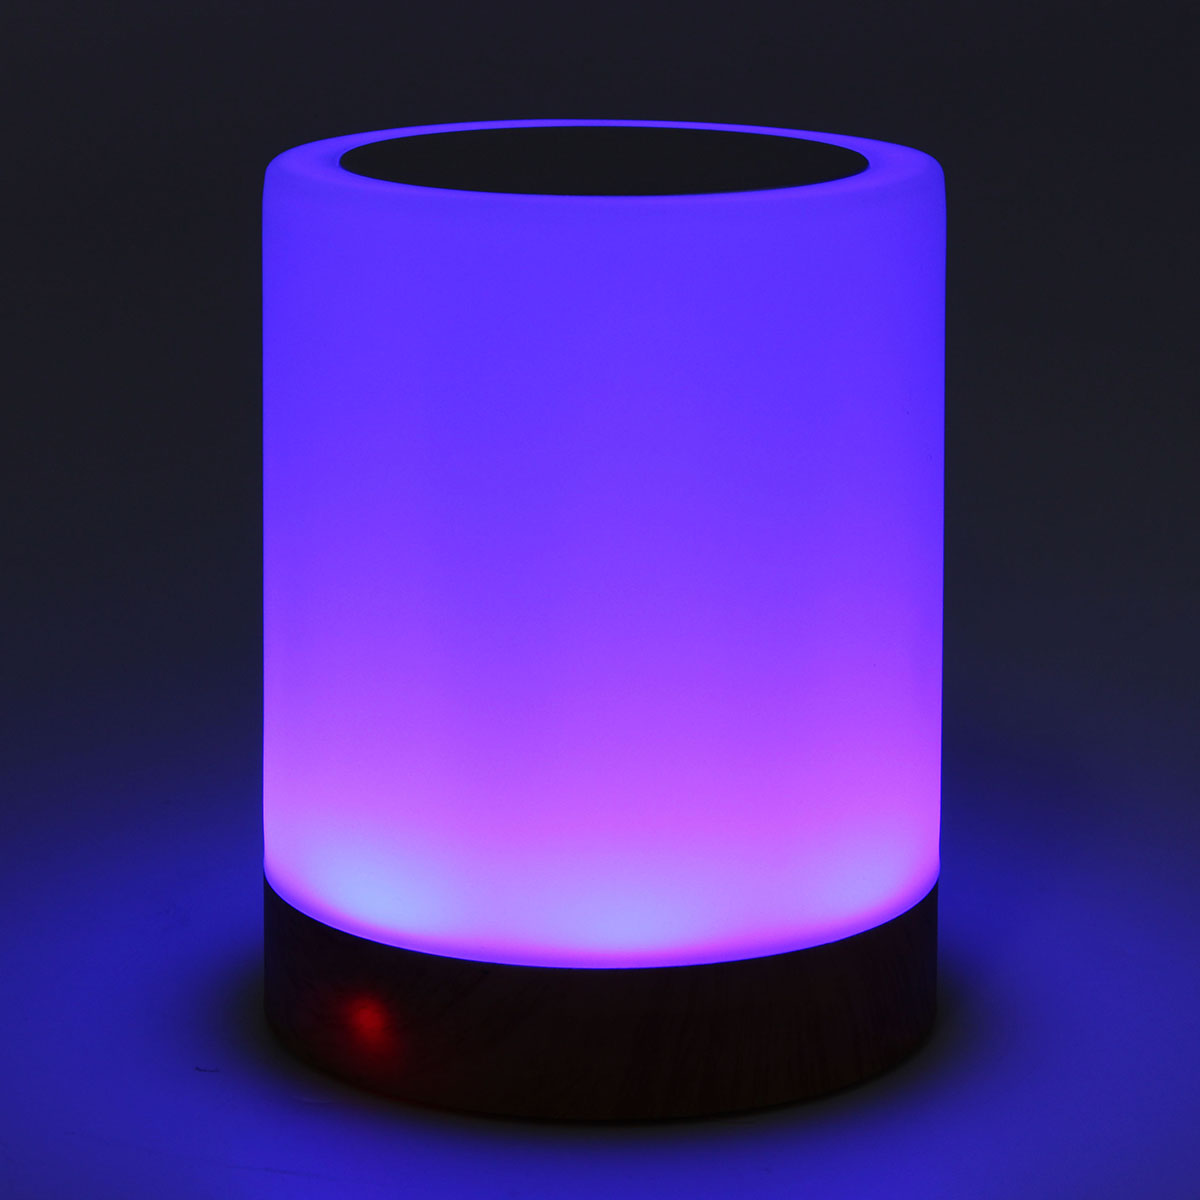 Dimmable-Touch-LED-Night-Light-USB-Charging-Colorful-Bedroom-Table-Lamp-Decor-Children-Gift-1689743-8